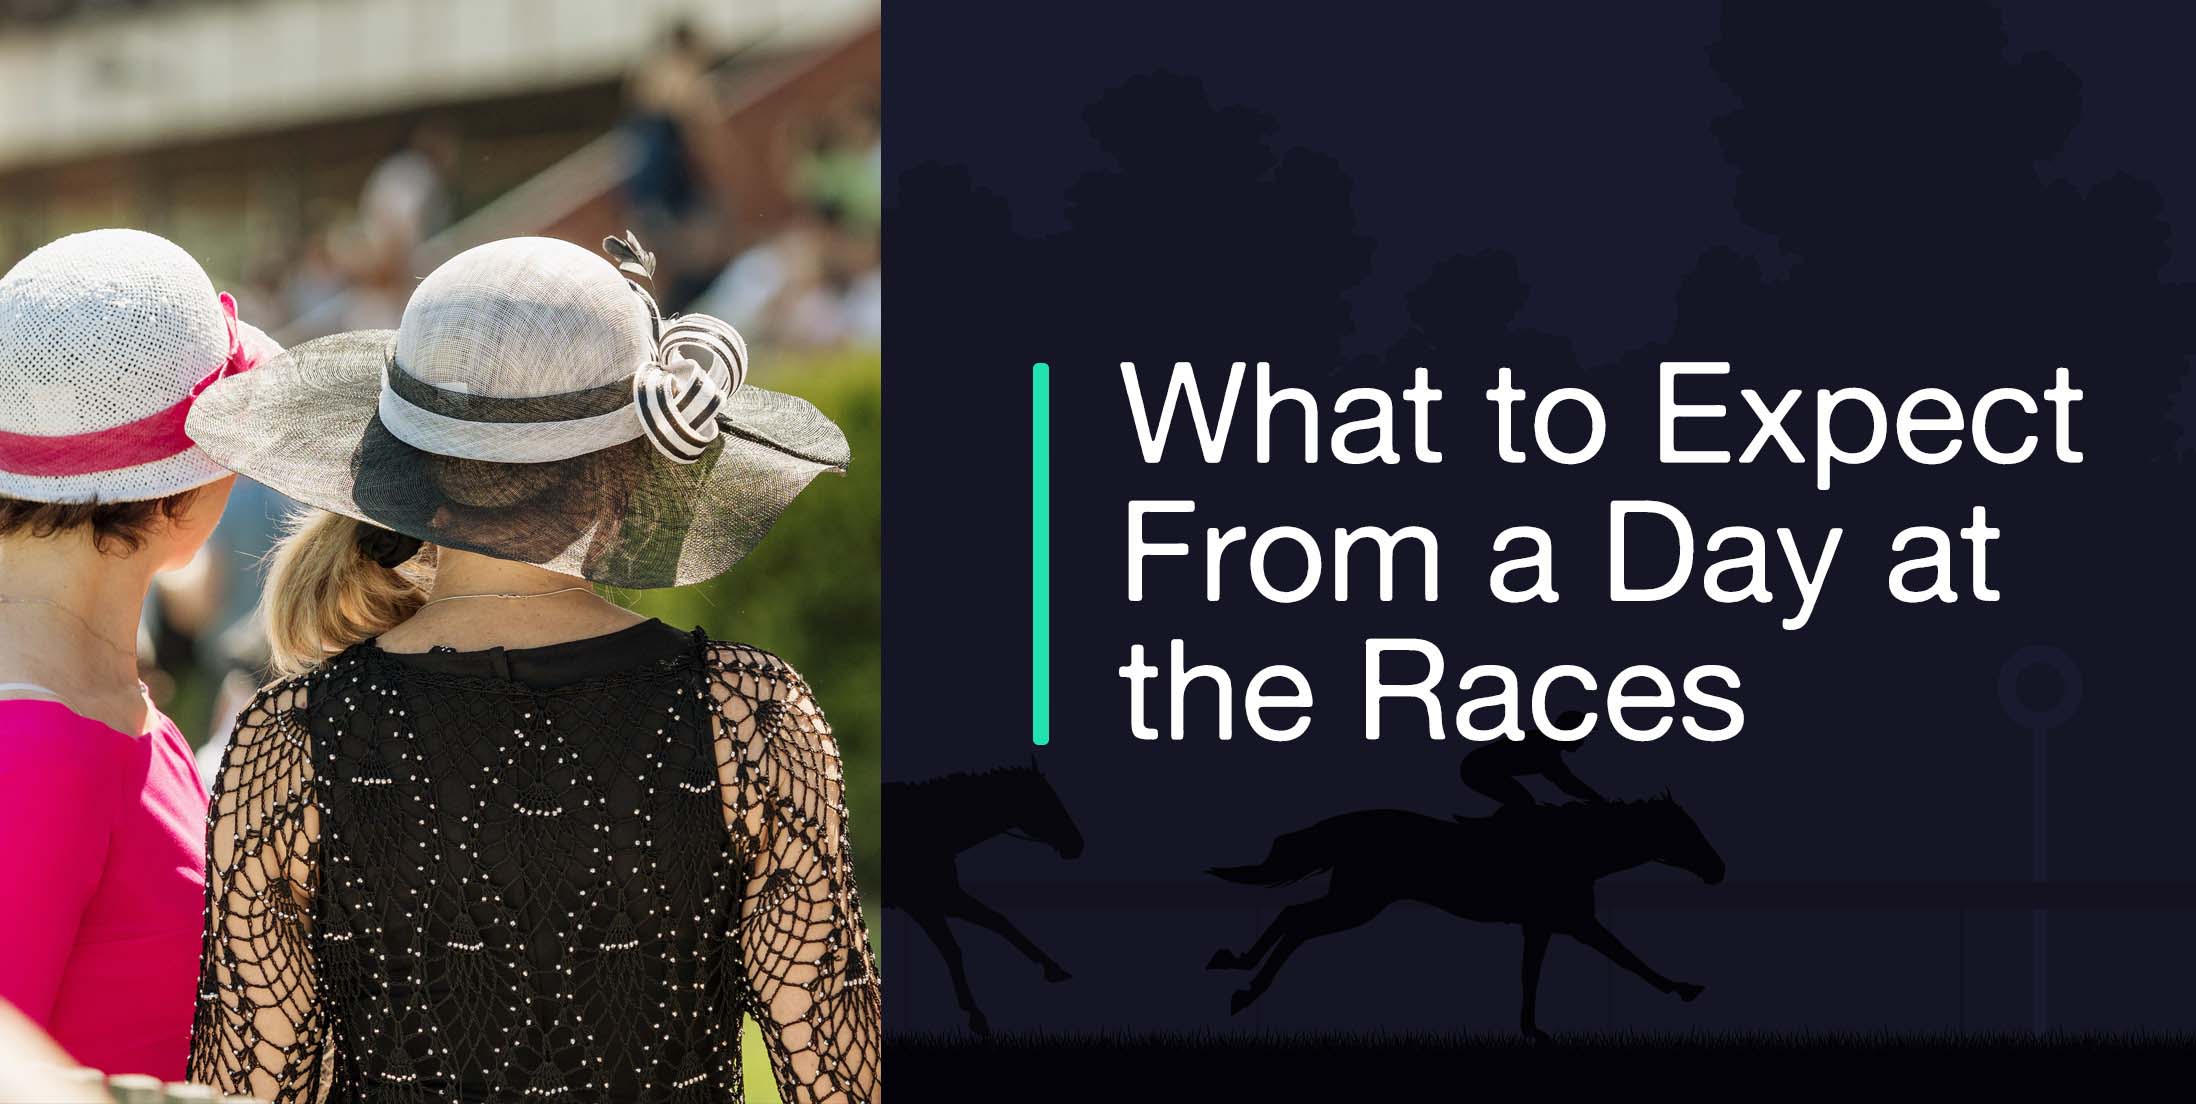 What to Expect from a Day at the Races